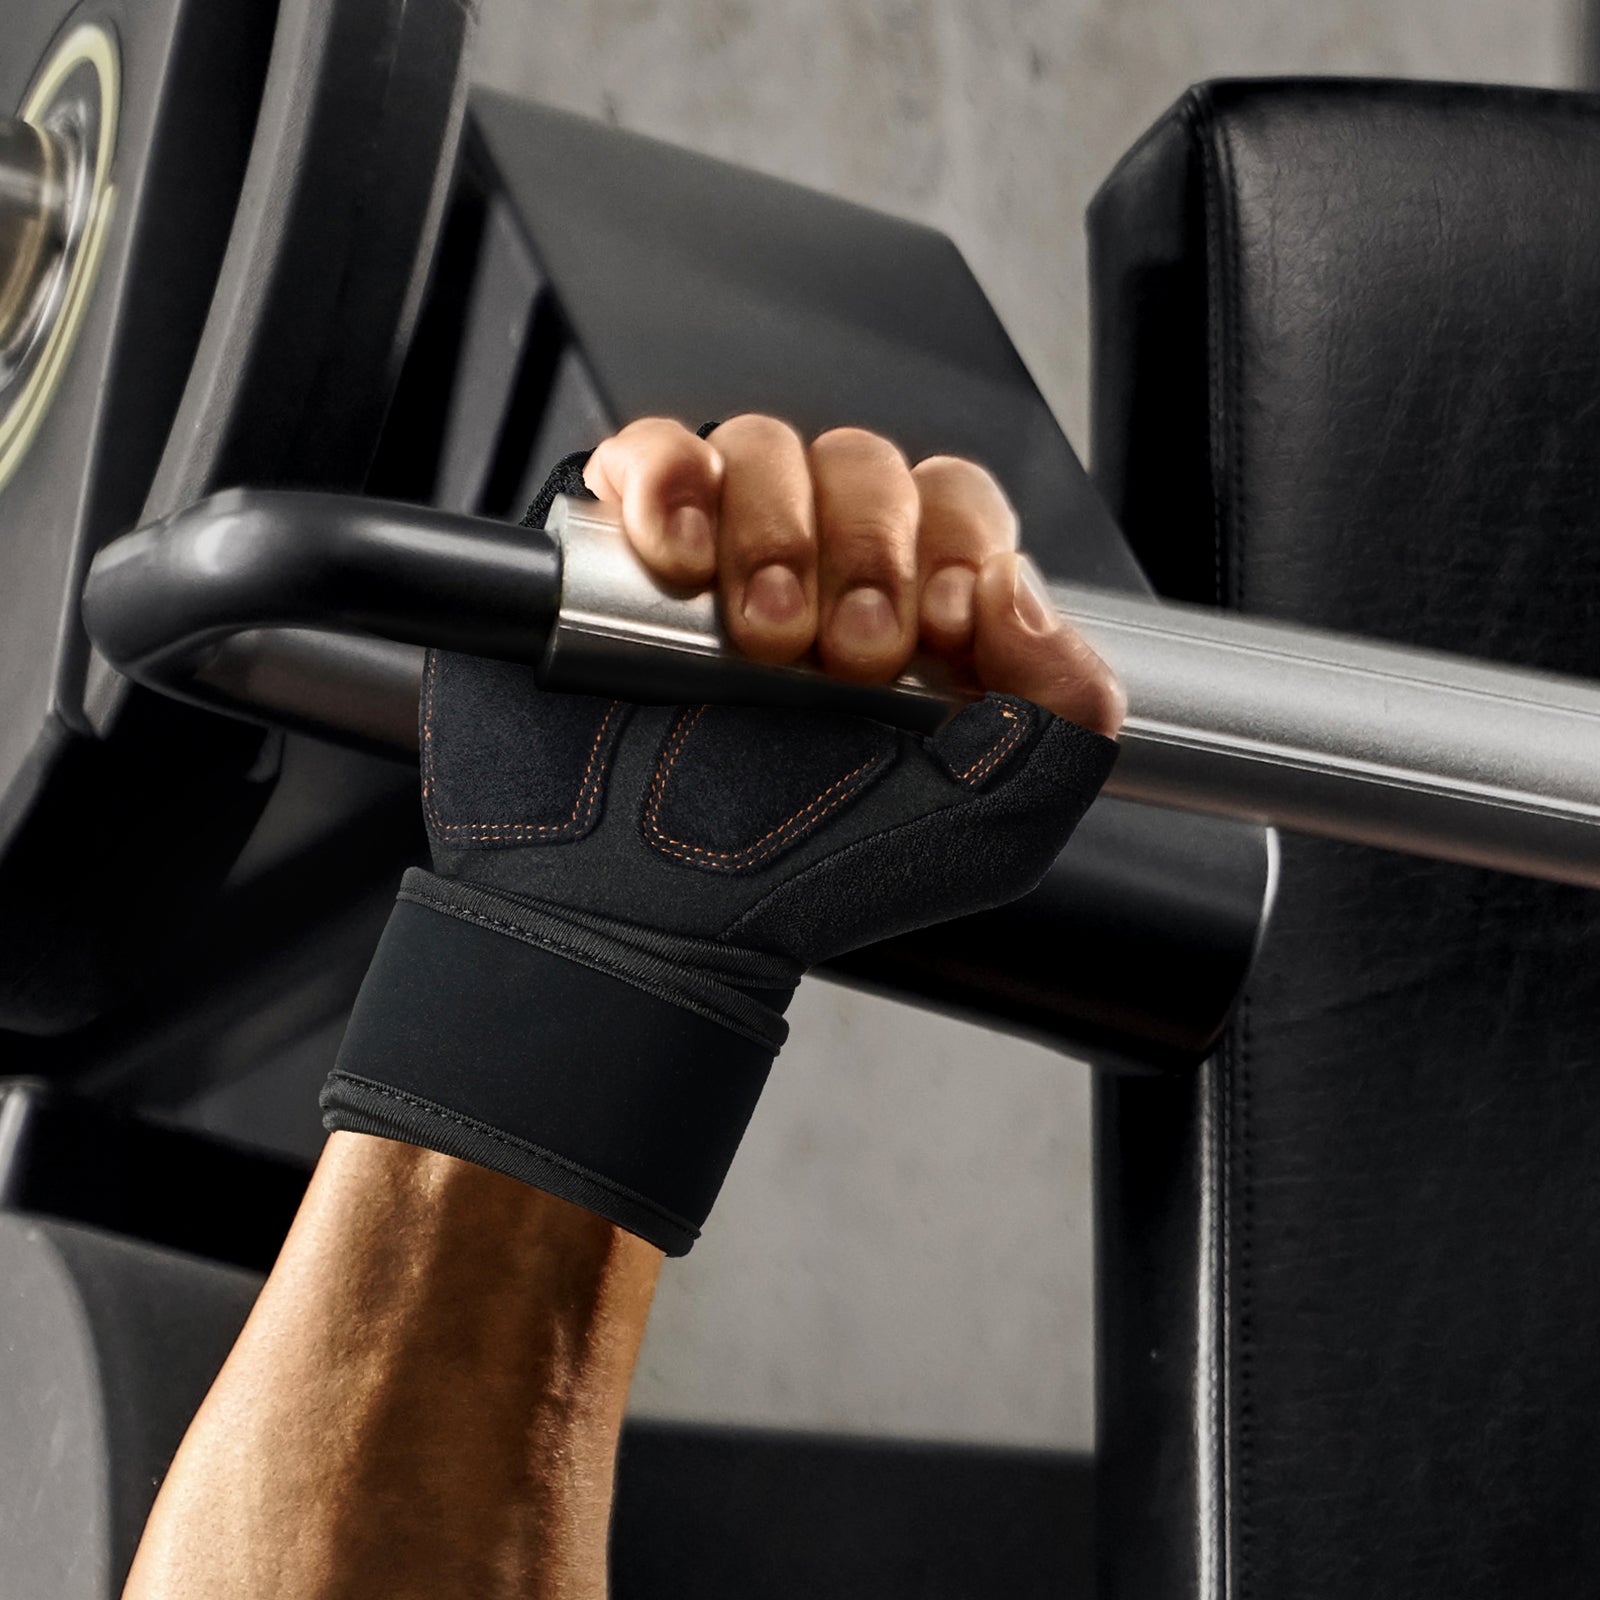 FREETOO® Excellent Grip and Wear-Resistant Weight Lifting Training Gloves